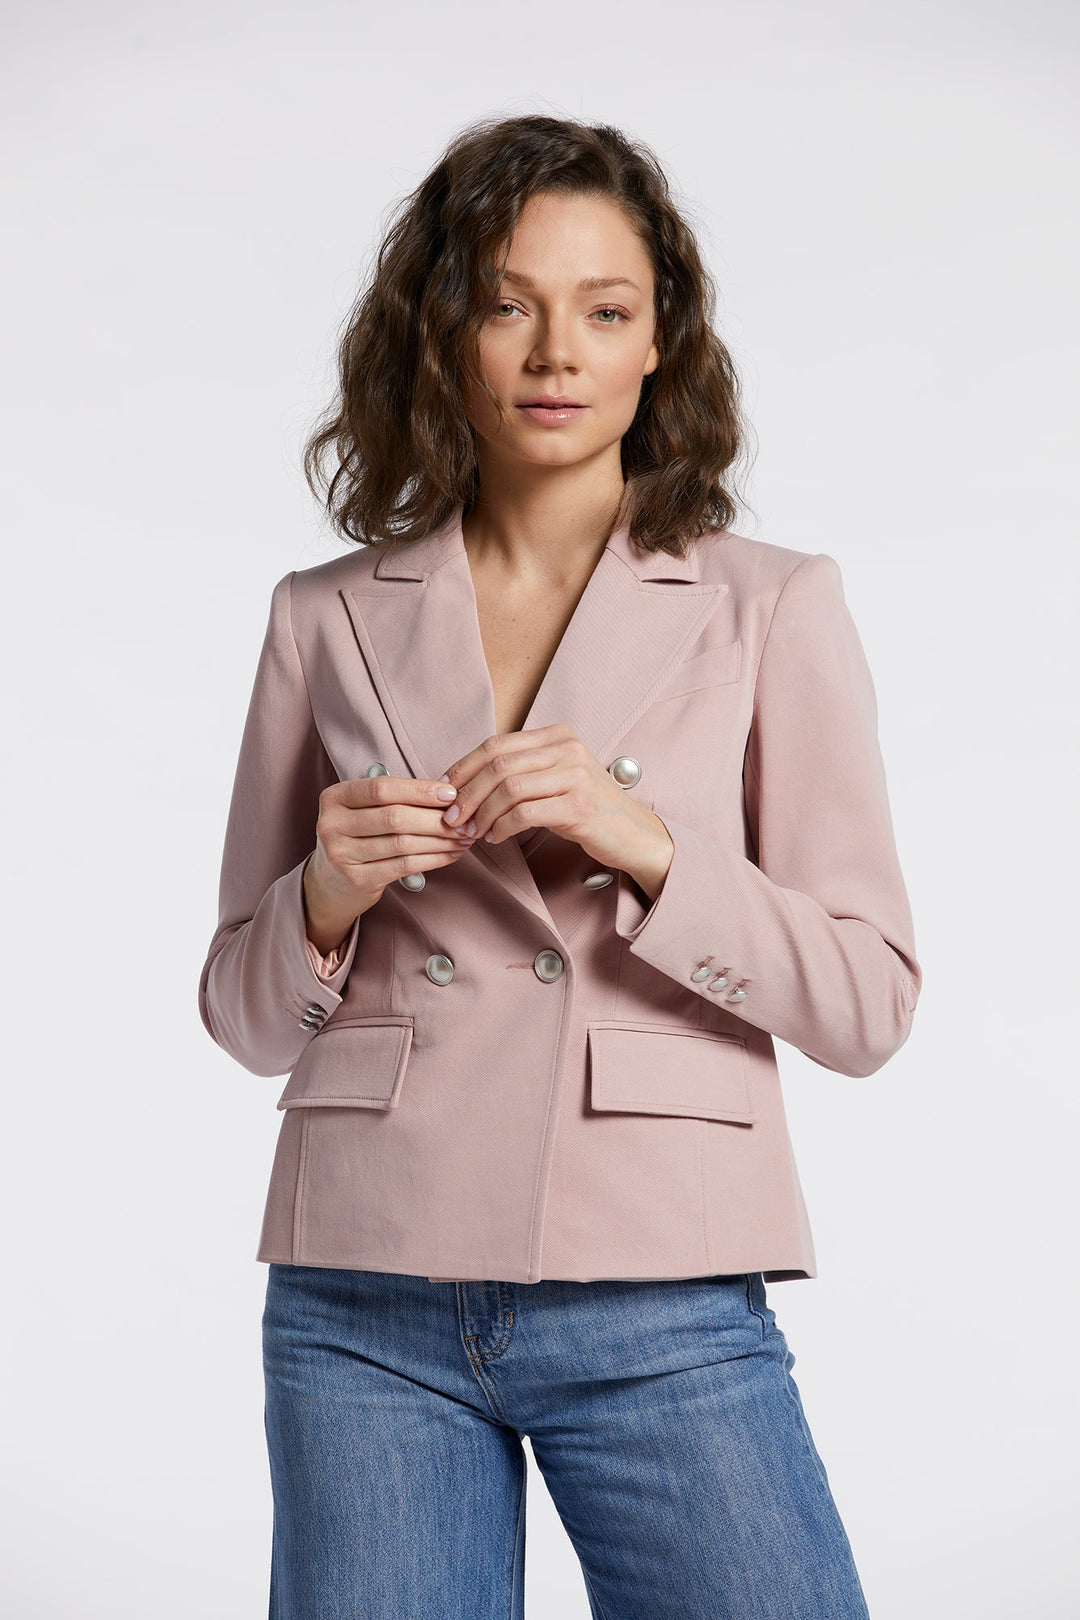 Adroit Atelier James Double Breasted Signature Stretch Blazer in Blush